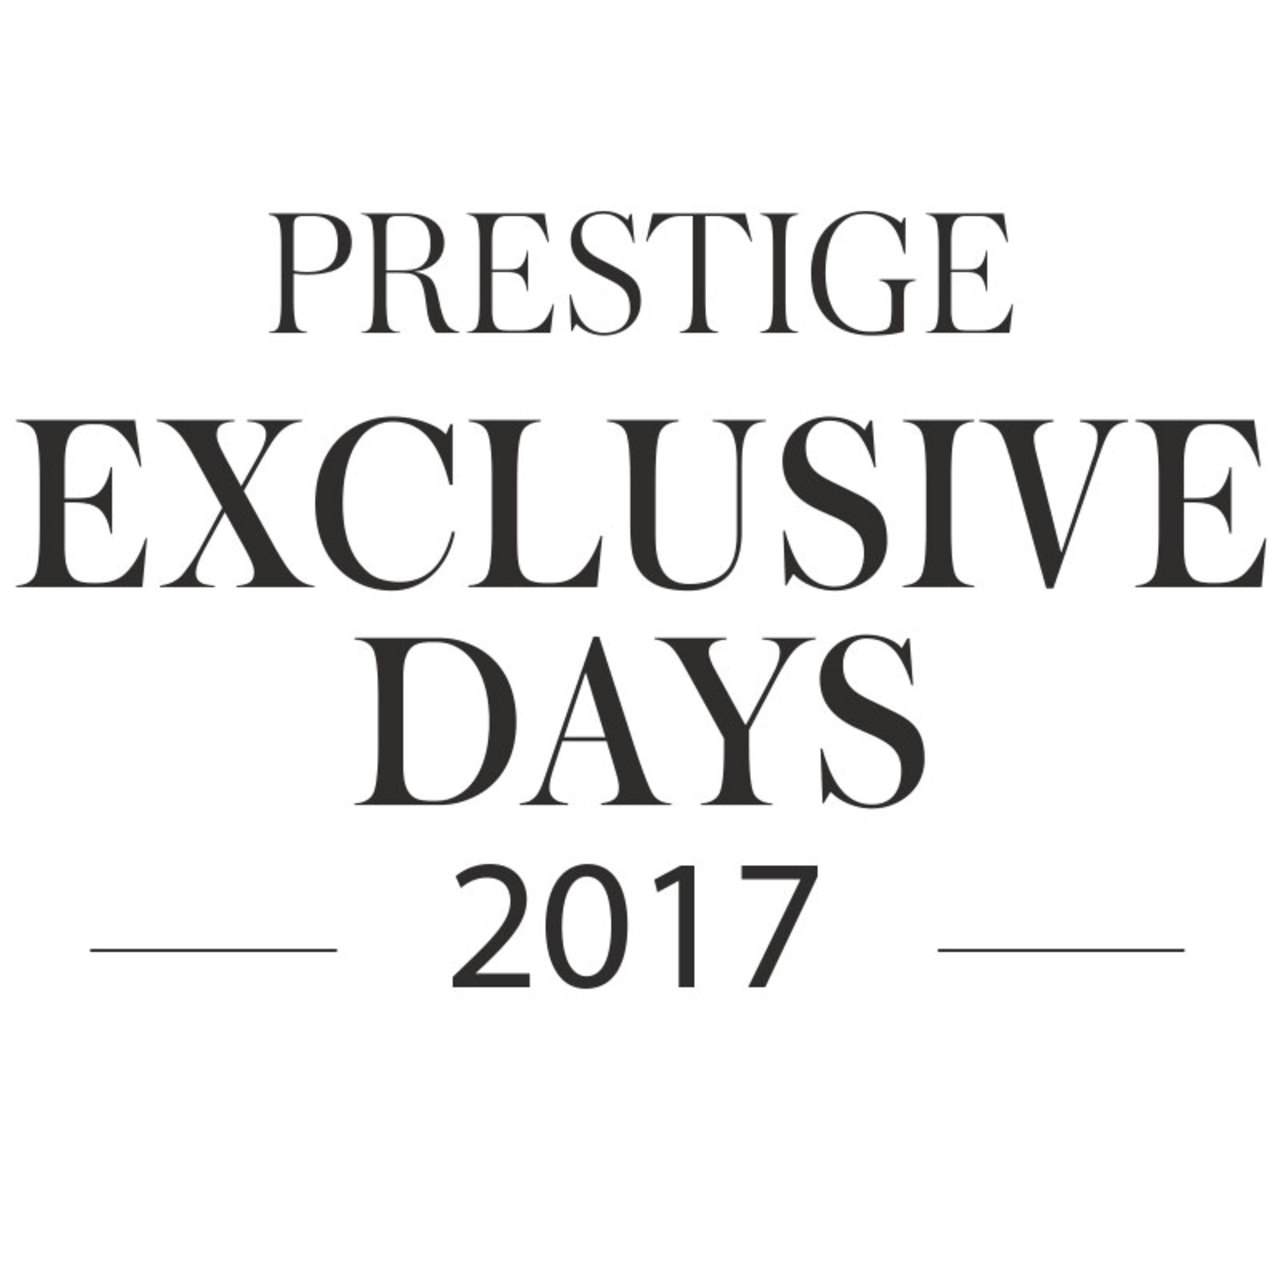 Exclusive days 2017